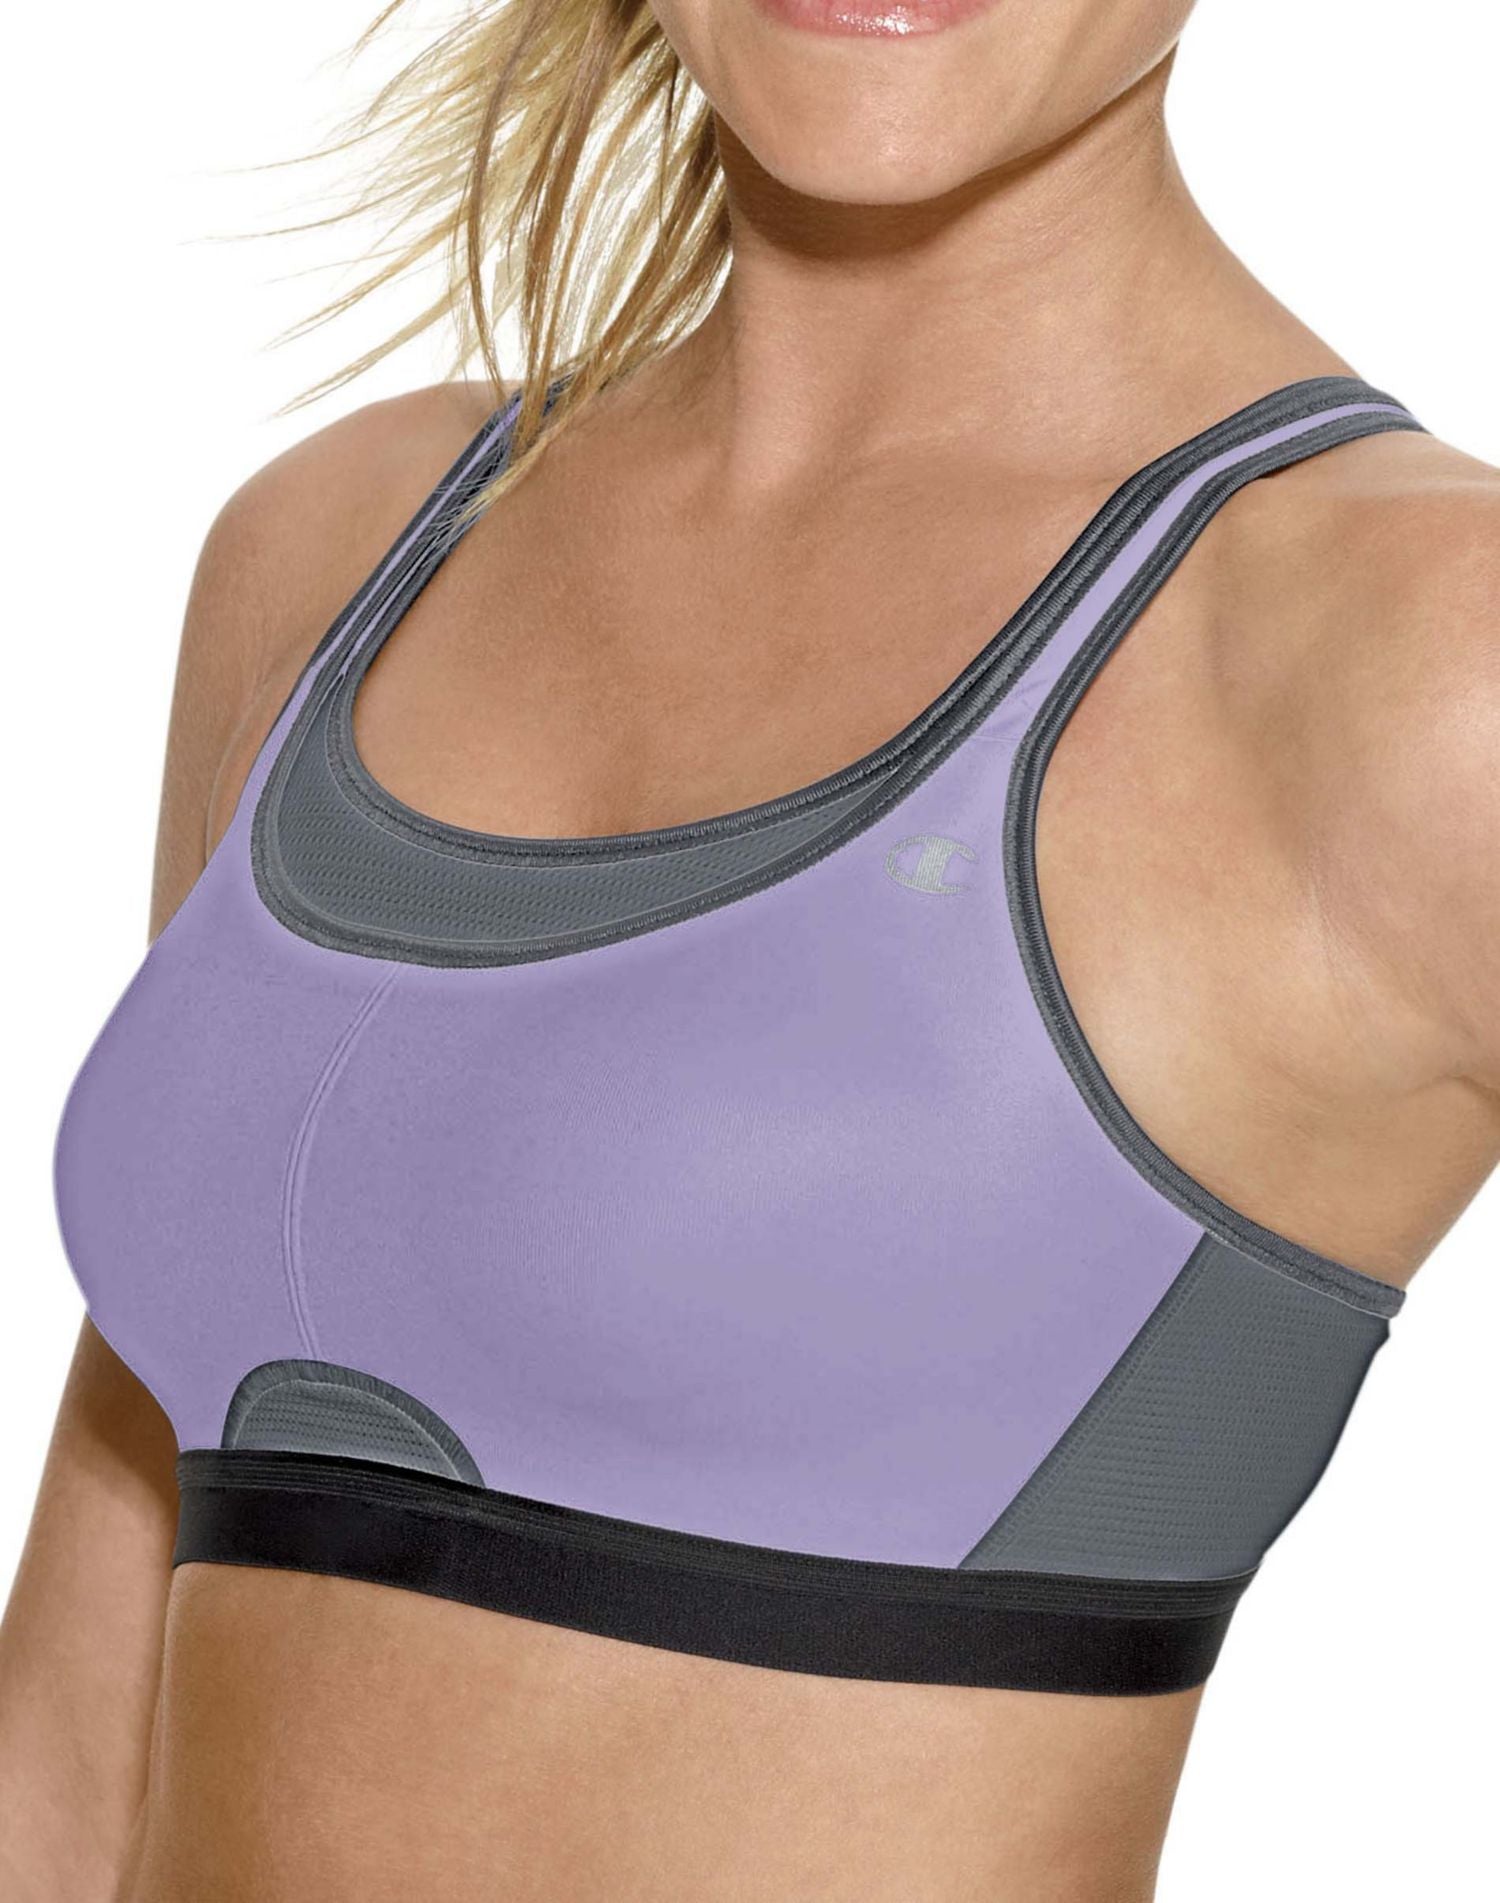 1660 - Champion All-Out Support Wireless Maximum Control Sports Bra